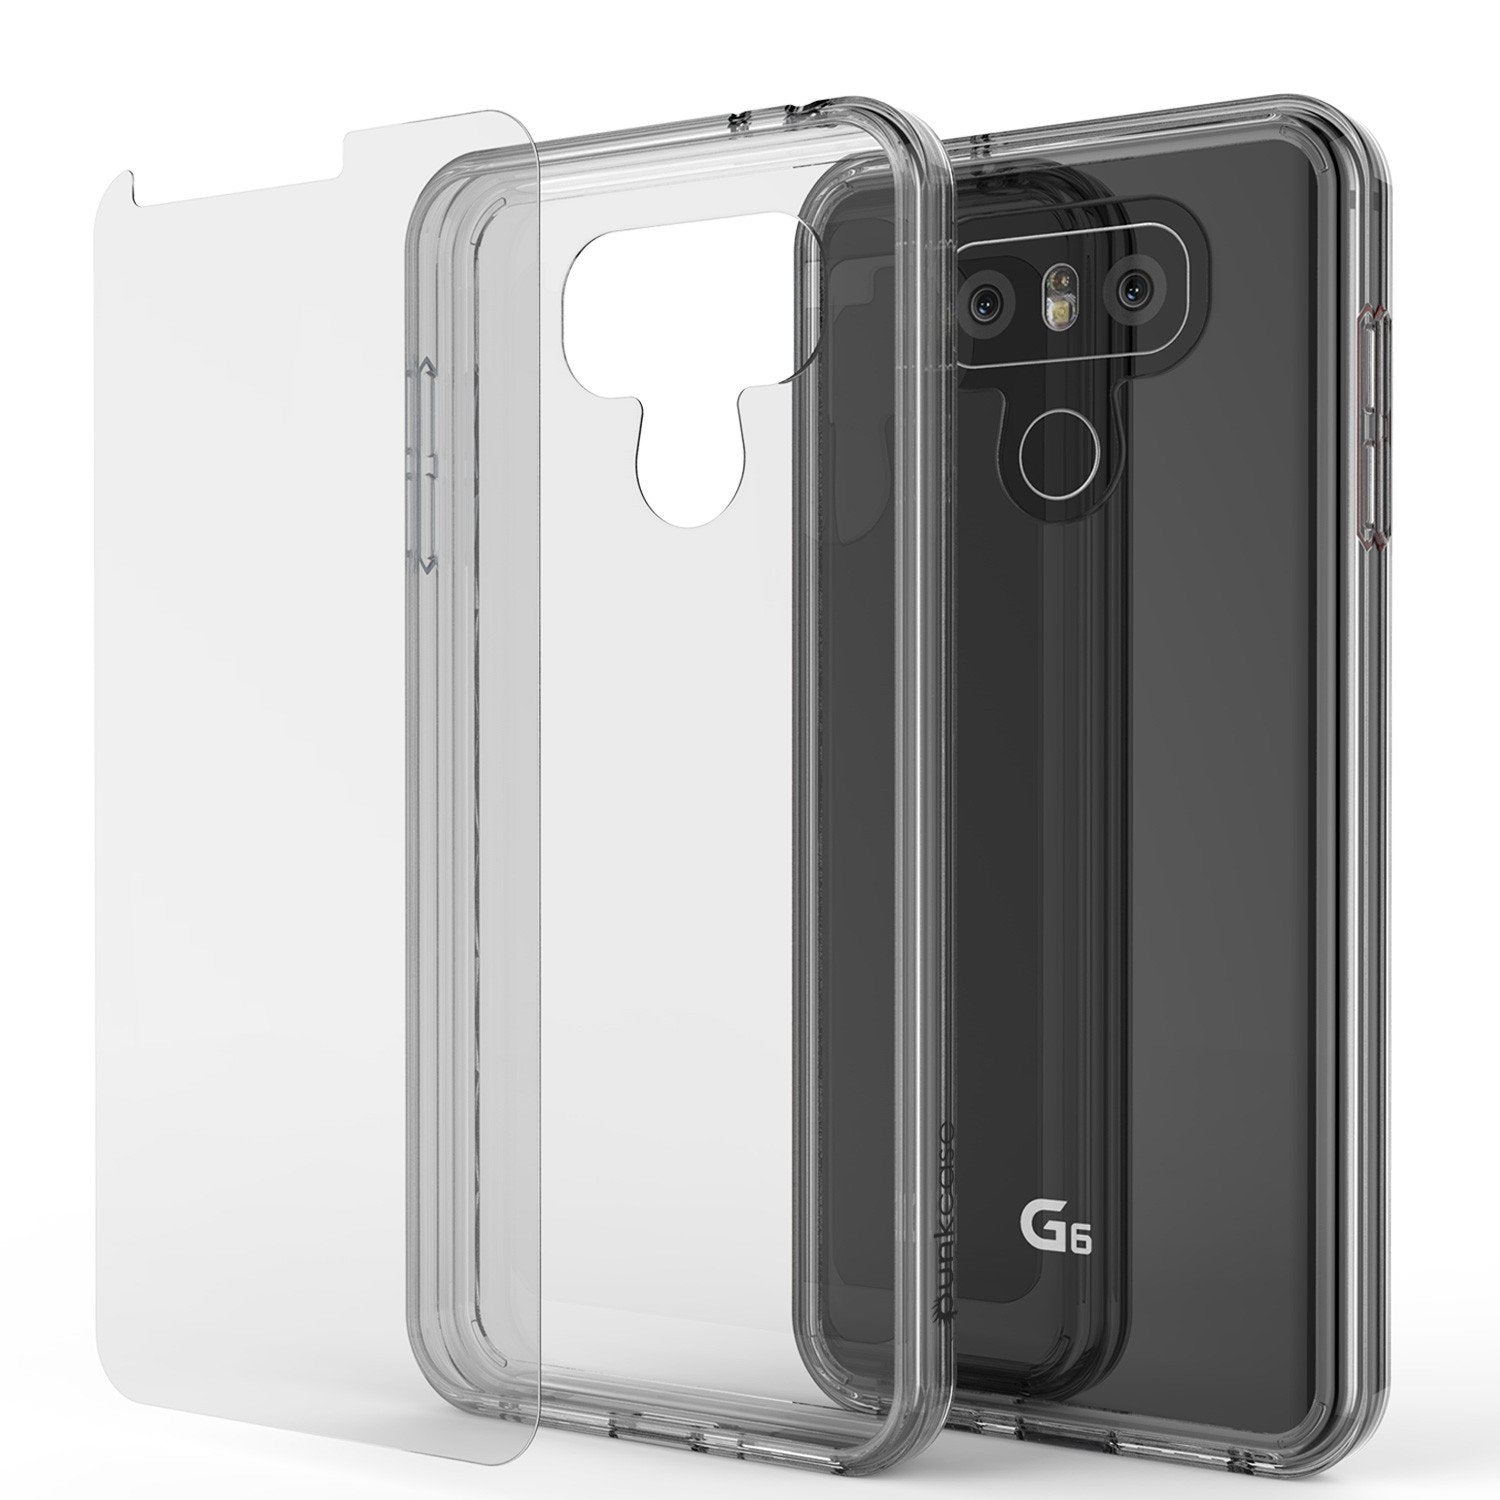 LG G6 Case Punkcase® LUCID 2.0 Clear Series w/ PUNK SHIELD Screen Protector | Ultra Fit - PunkCase NZ